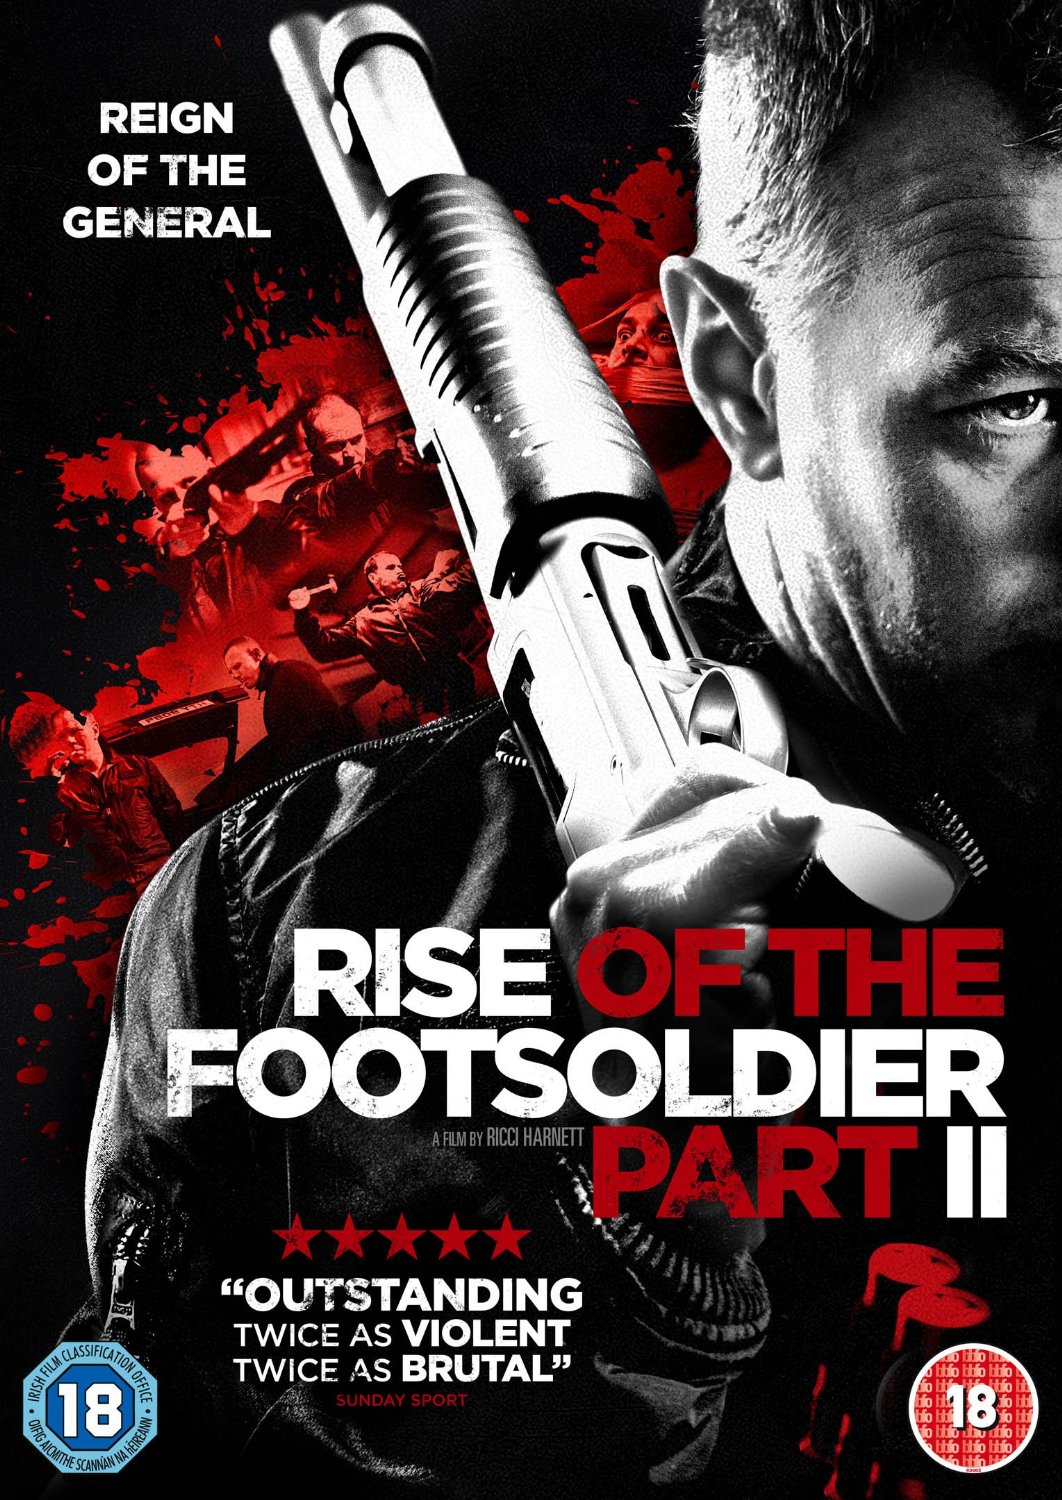 Rise of the Footsoldier Part II 2018 - Full (HD)